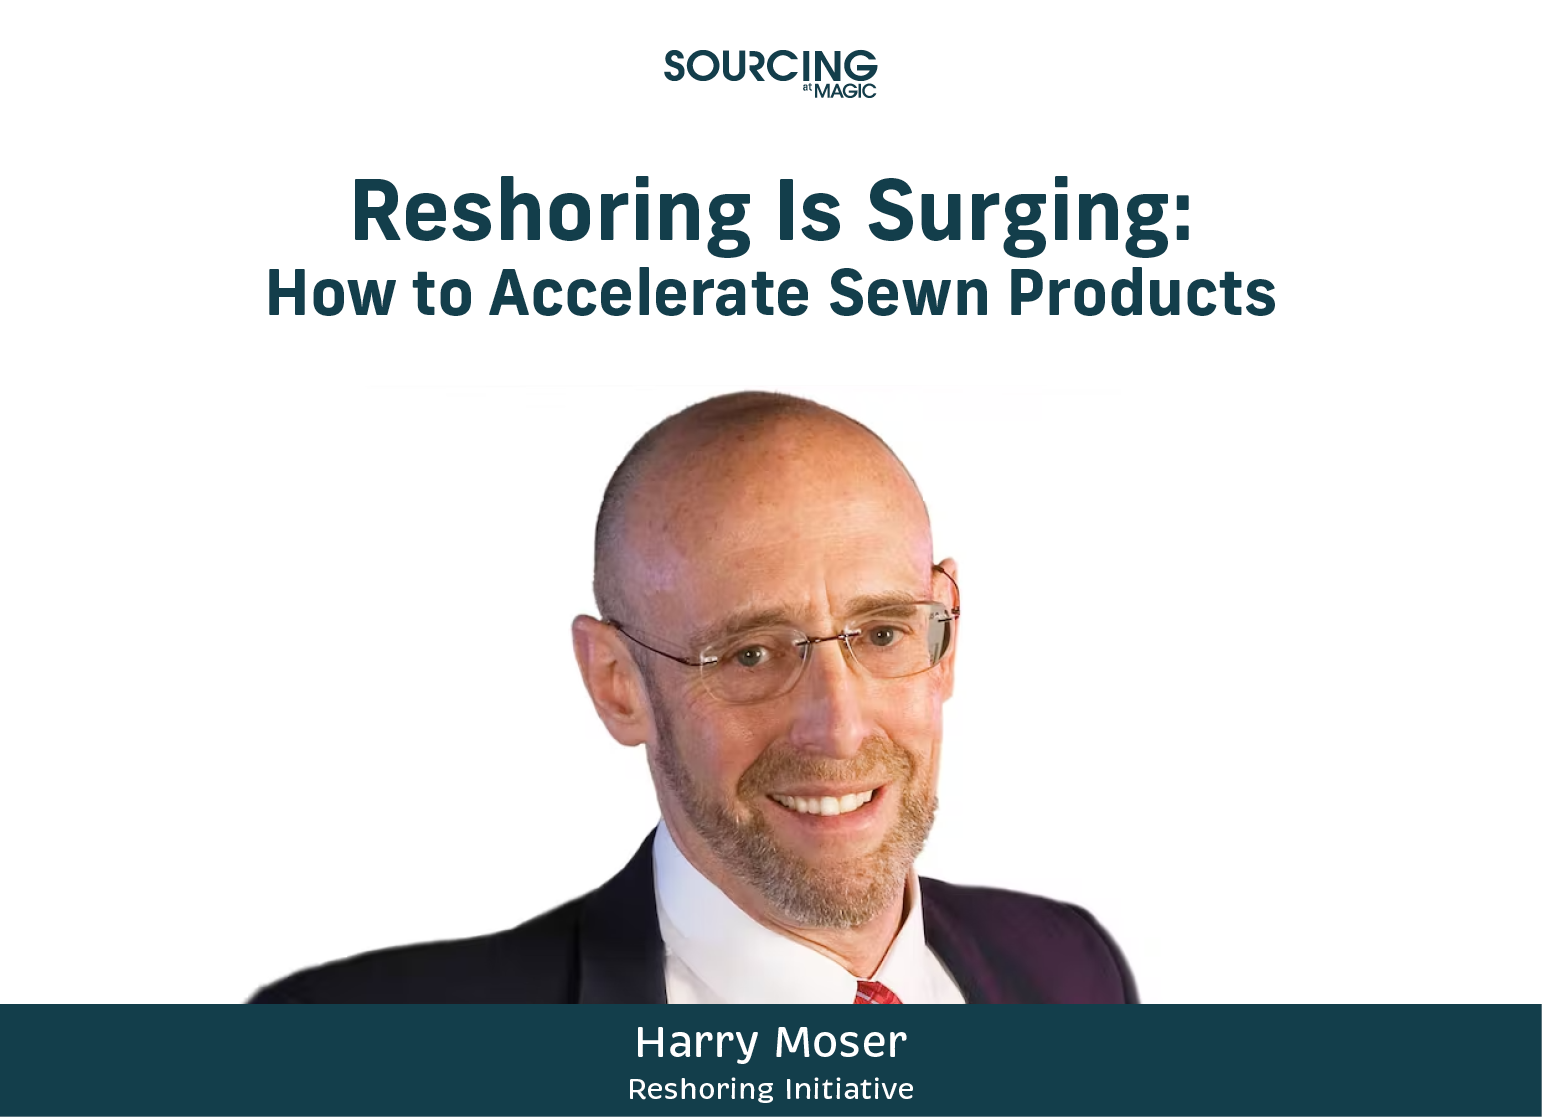 Reshoring Is Surging: How To Accelerate Sewn Products